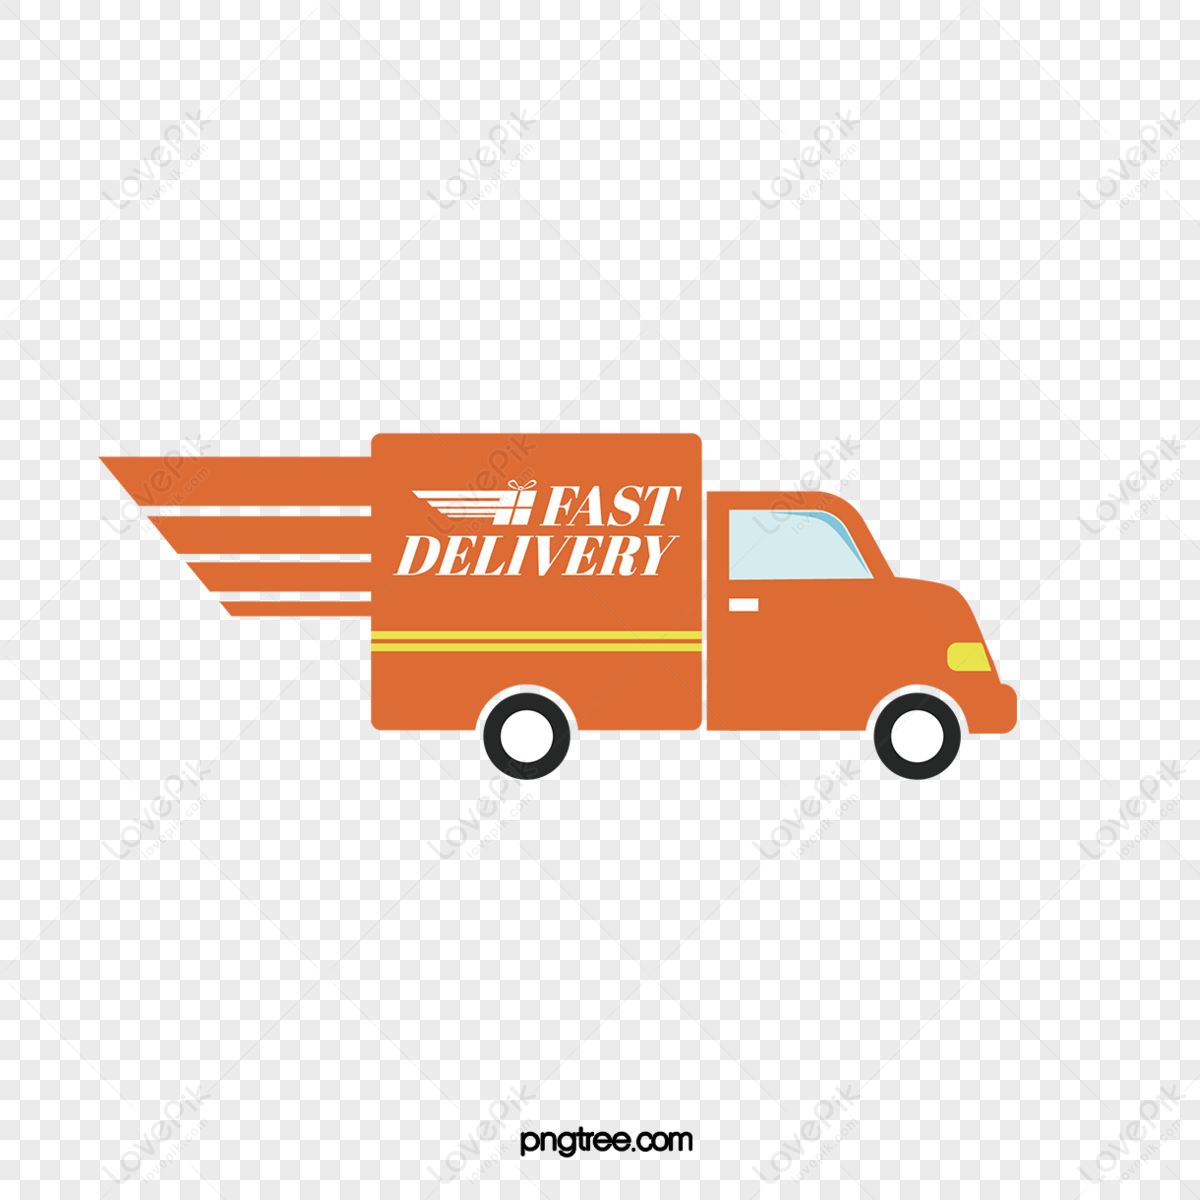 Express Delivery PNG Transparent Images Free Download